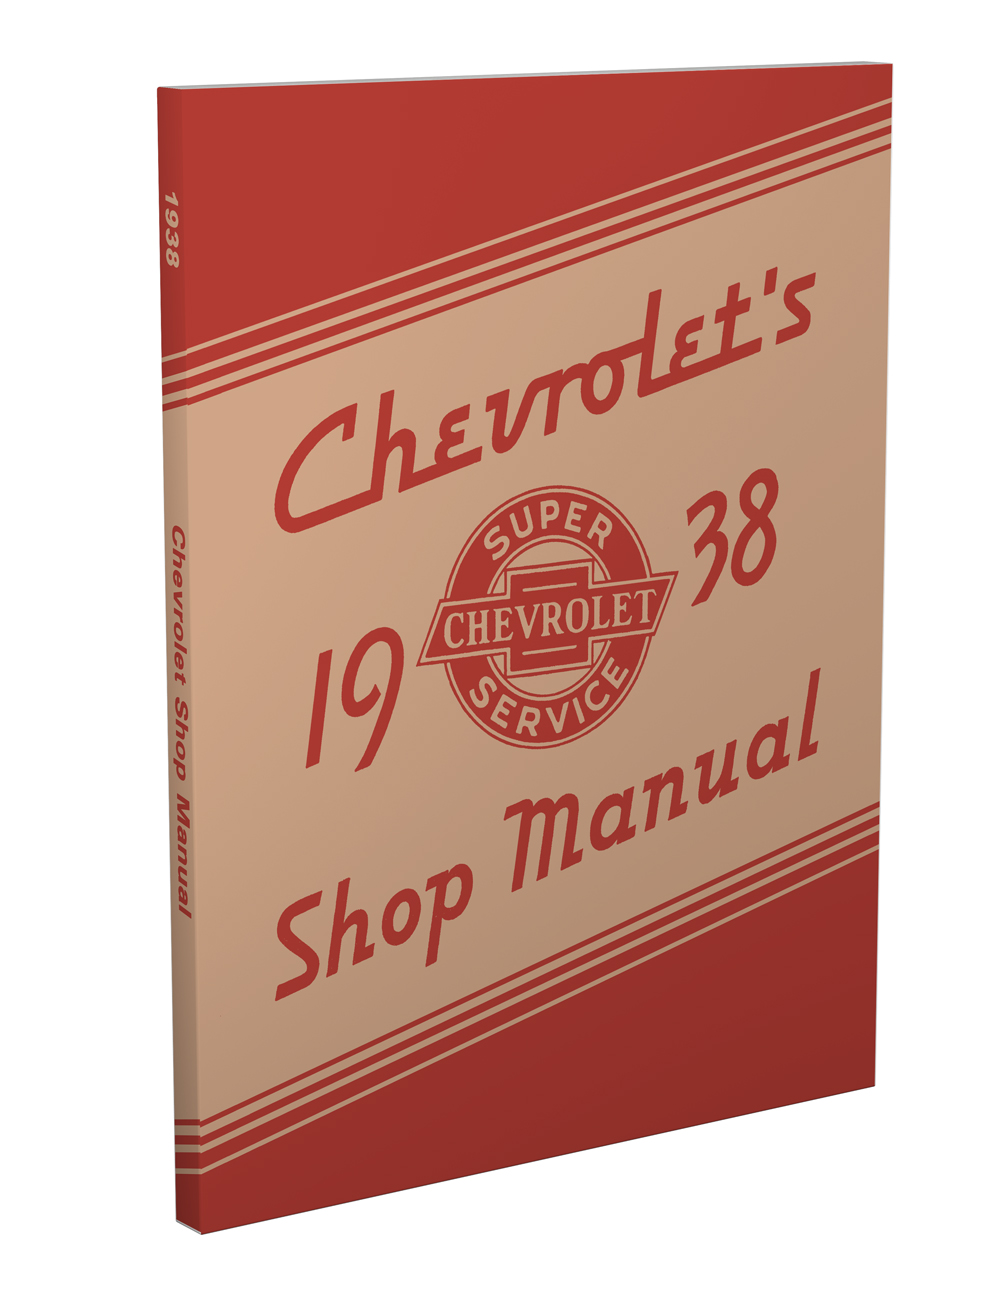 CHEVROLET 1938 Truck Owner's Manual 38 Chevy Pick Up 